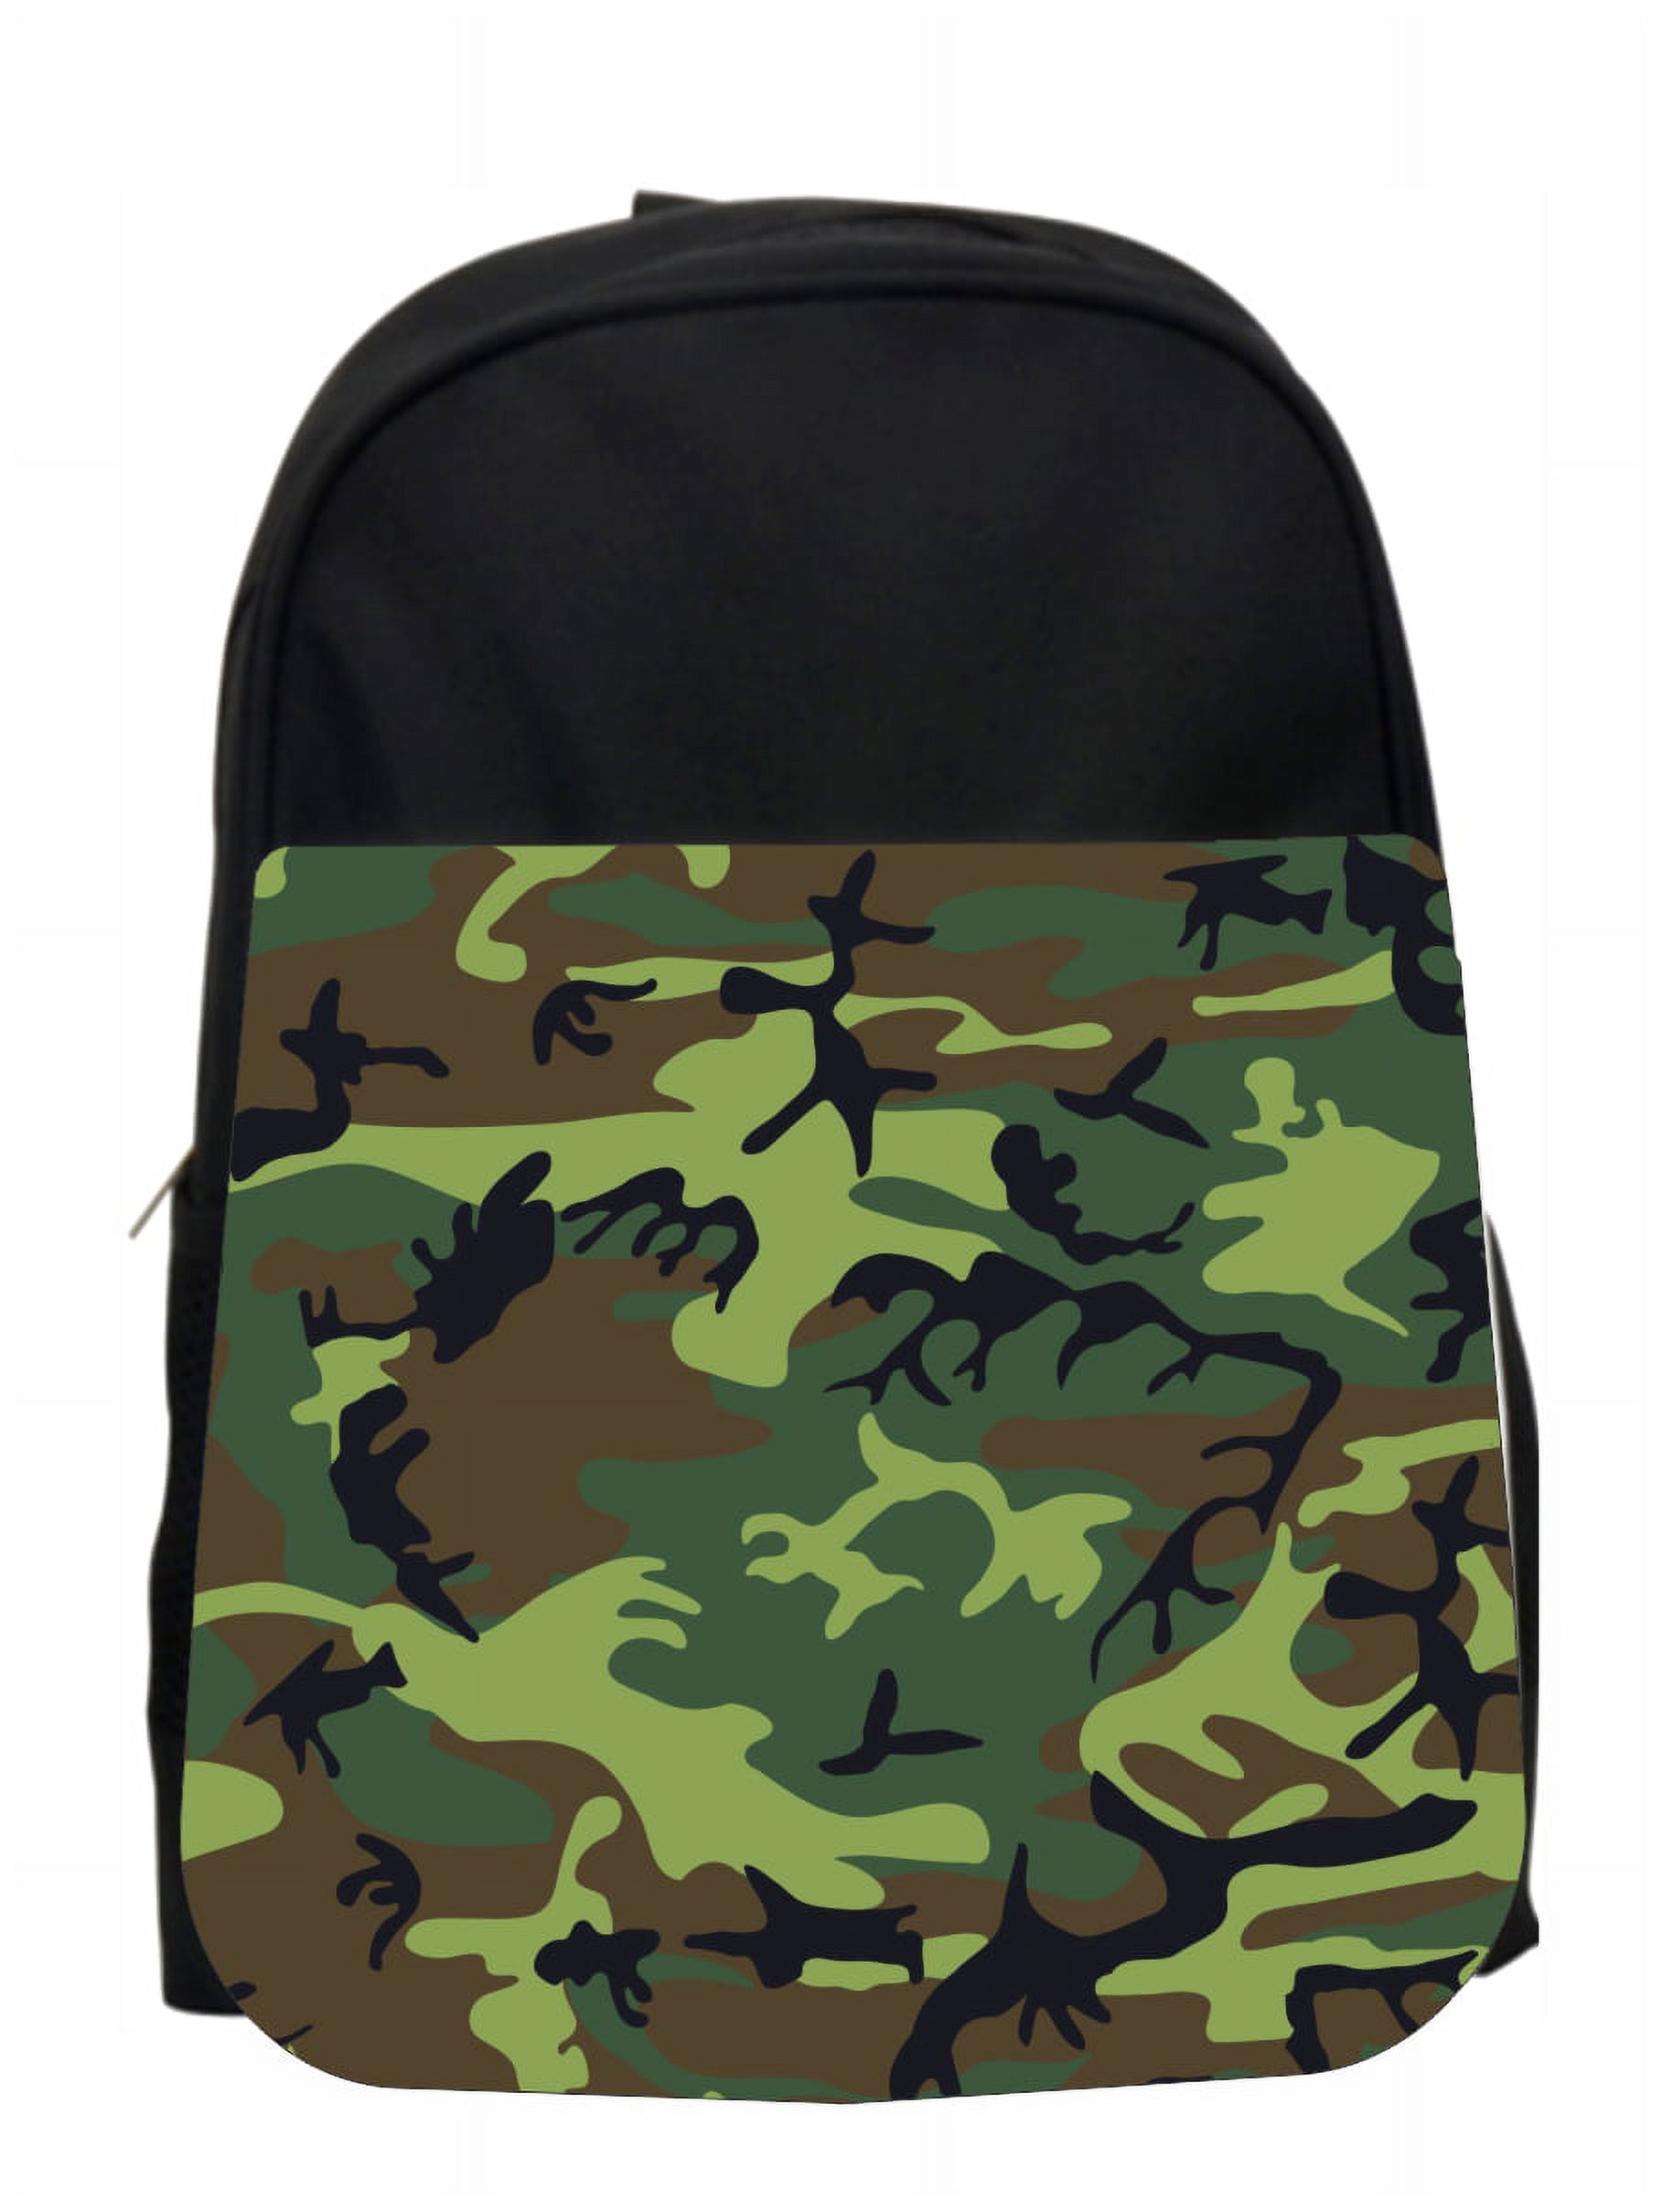 Boys Backpack Camo Camouflage Kids Pre-School Backpack - image 1 of 2